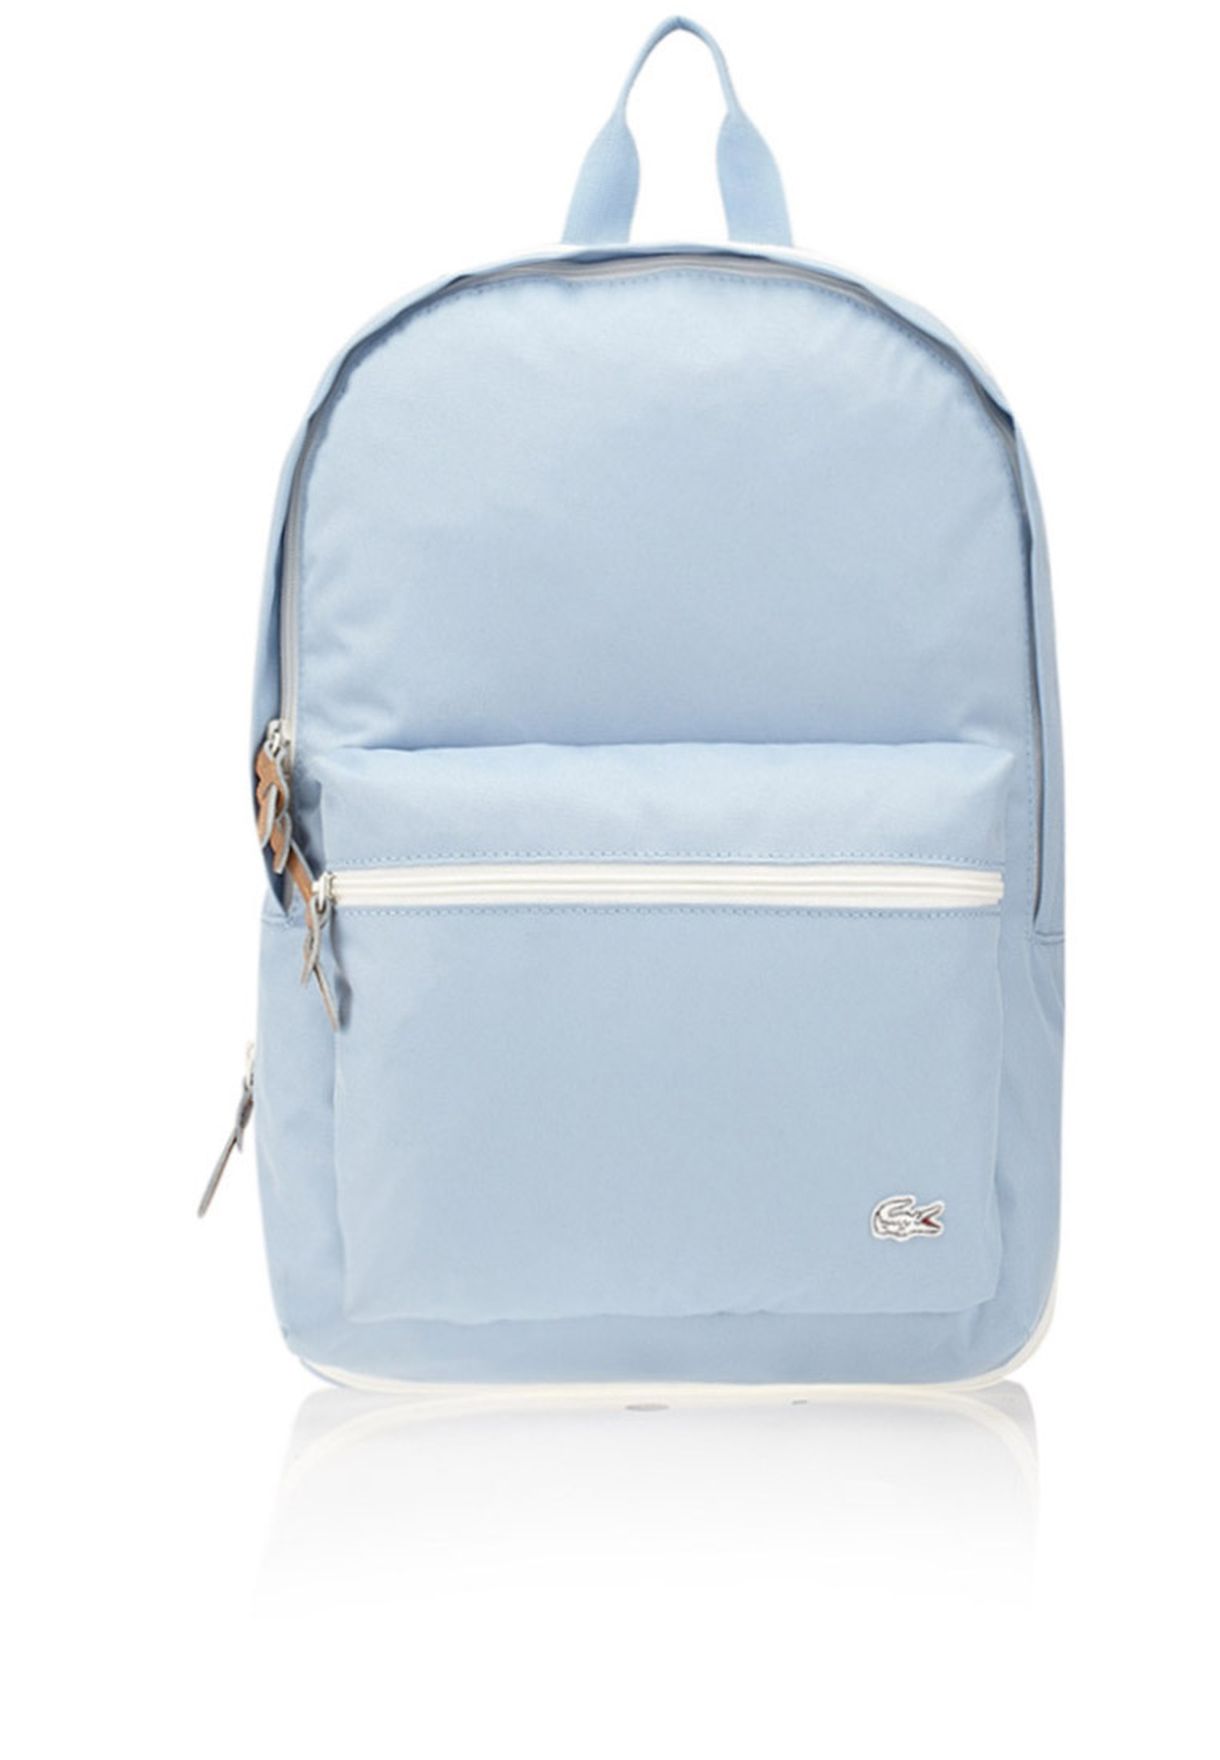 lacoste blue backpack